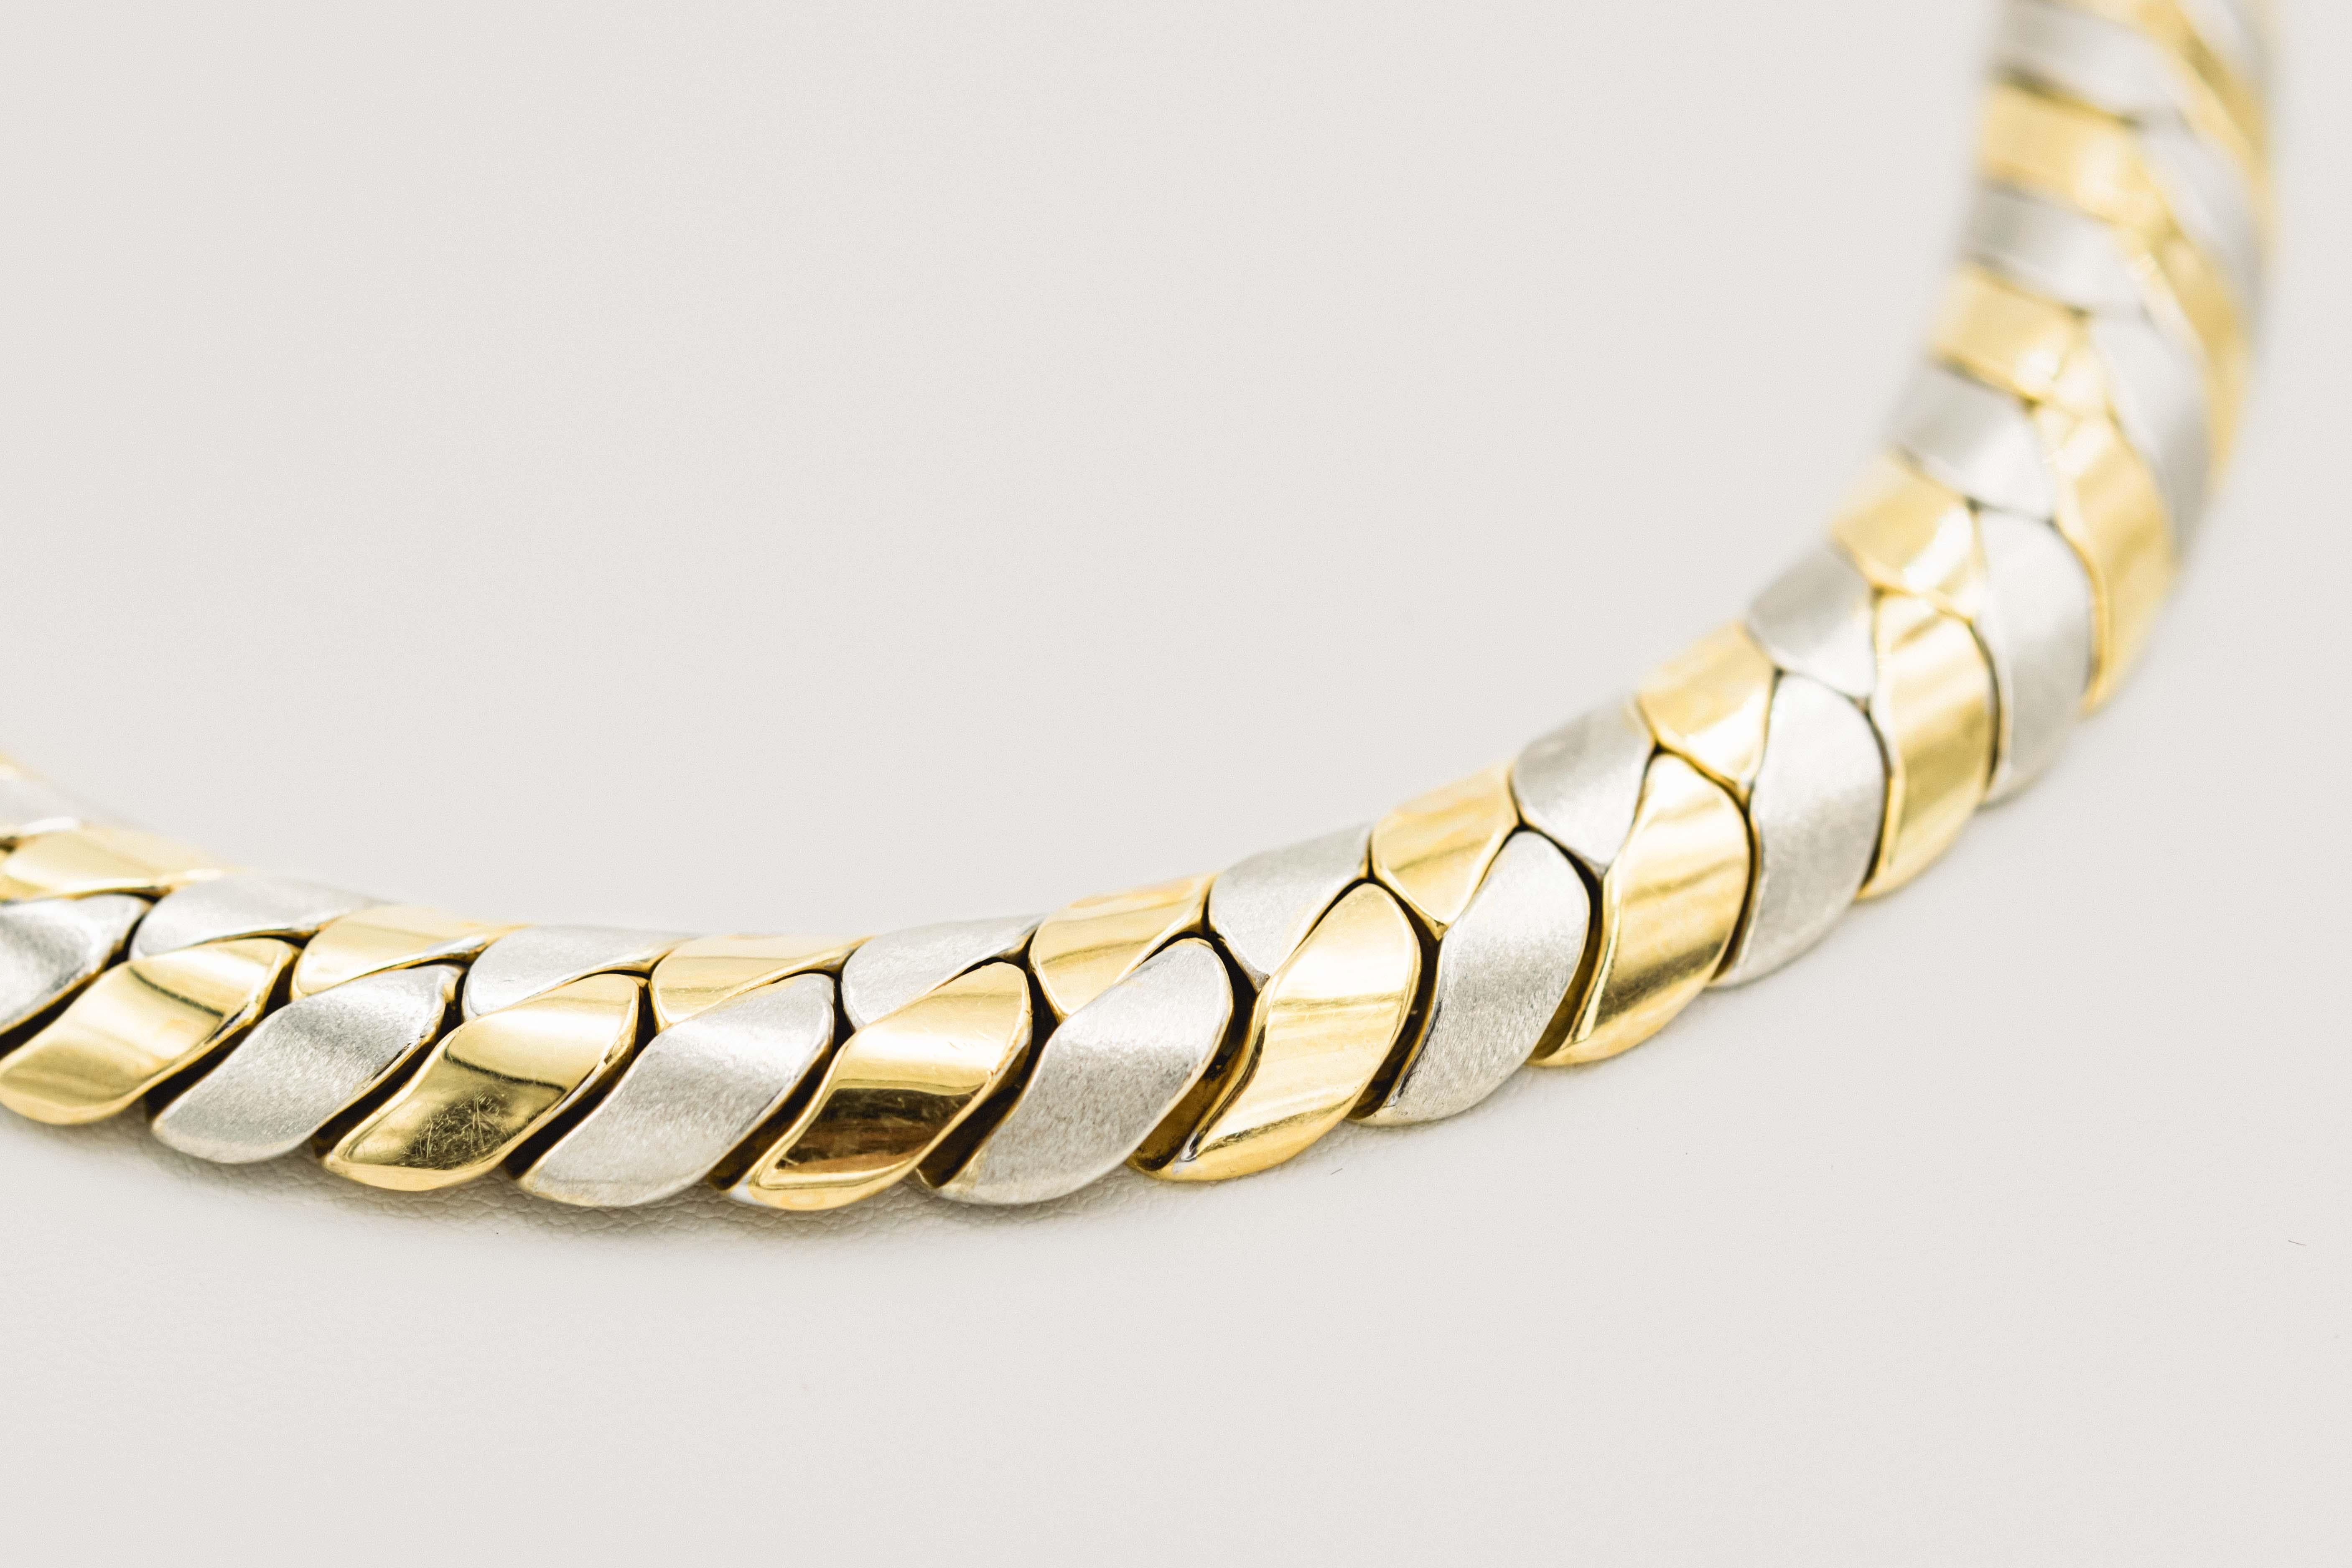 Two Tone Yellow and White Gold Italian Braid Necklace & Bracelet Suite For Sale 5